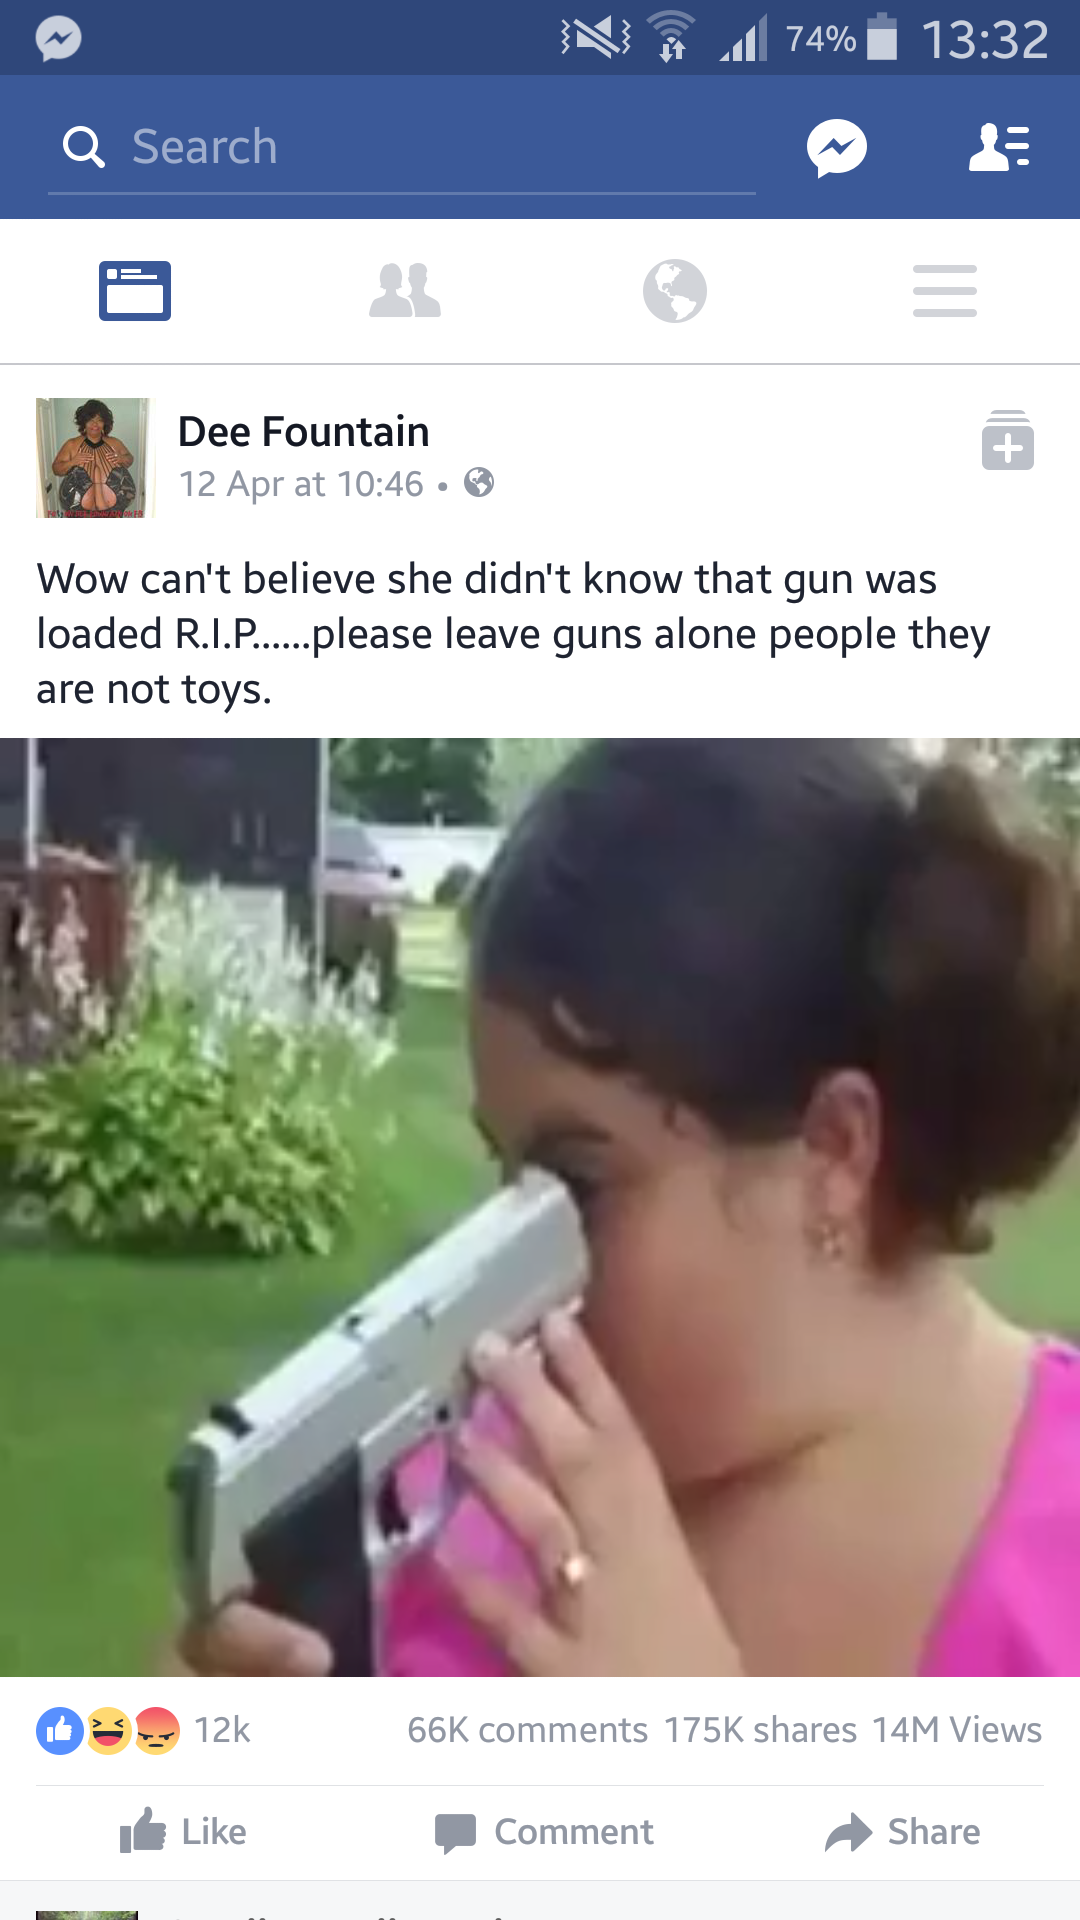 cringe people doing funny stuff - N R . 74% Search Dee Fountain 12 Apr at 10.46. Wow can't believe she didn't know that gun was loaded R.I.P.....please leave guns alone people they are not toys. De . 14M Views de Lice Comment